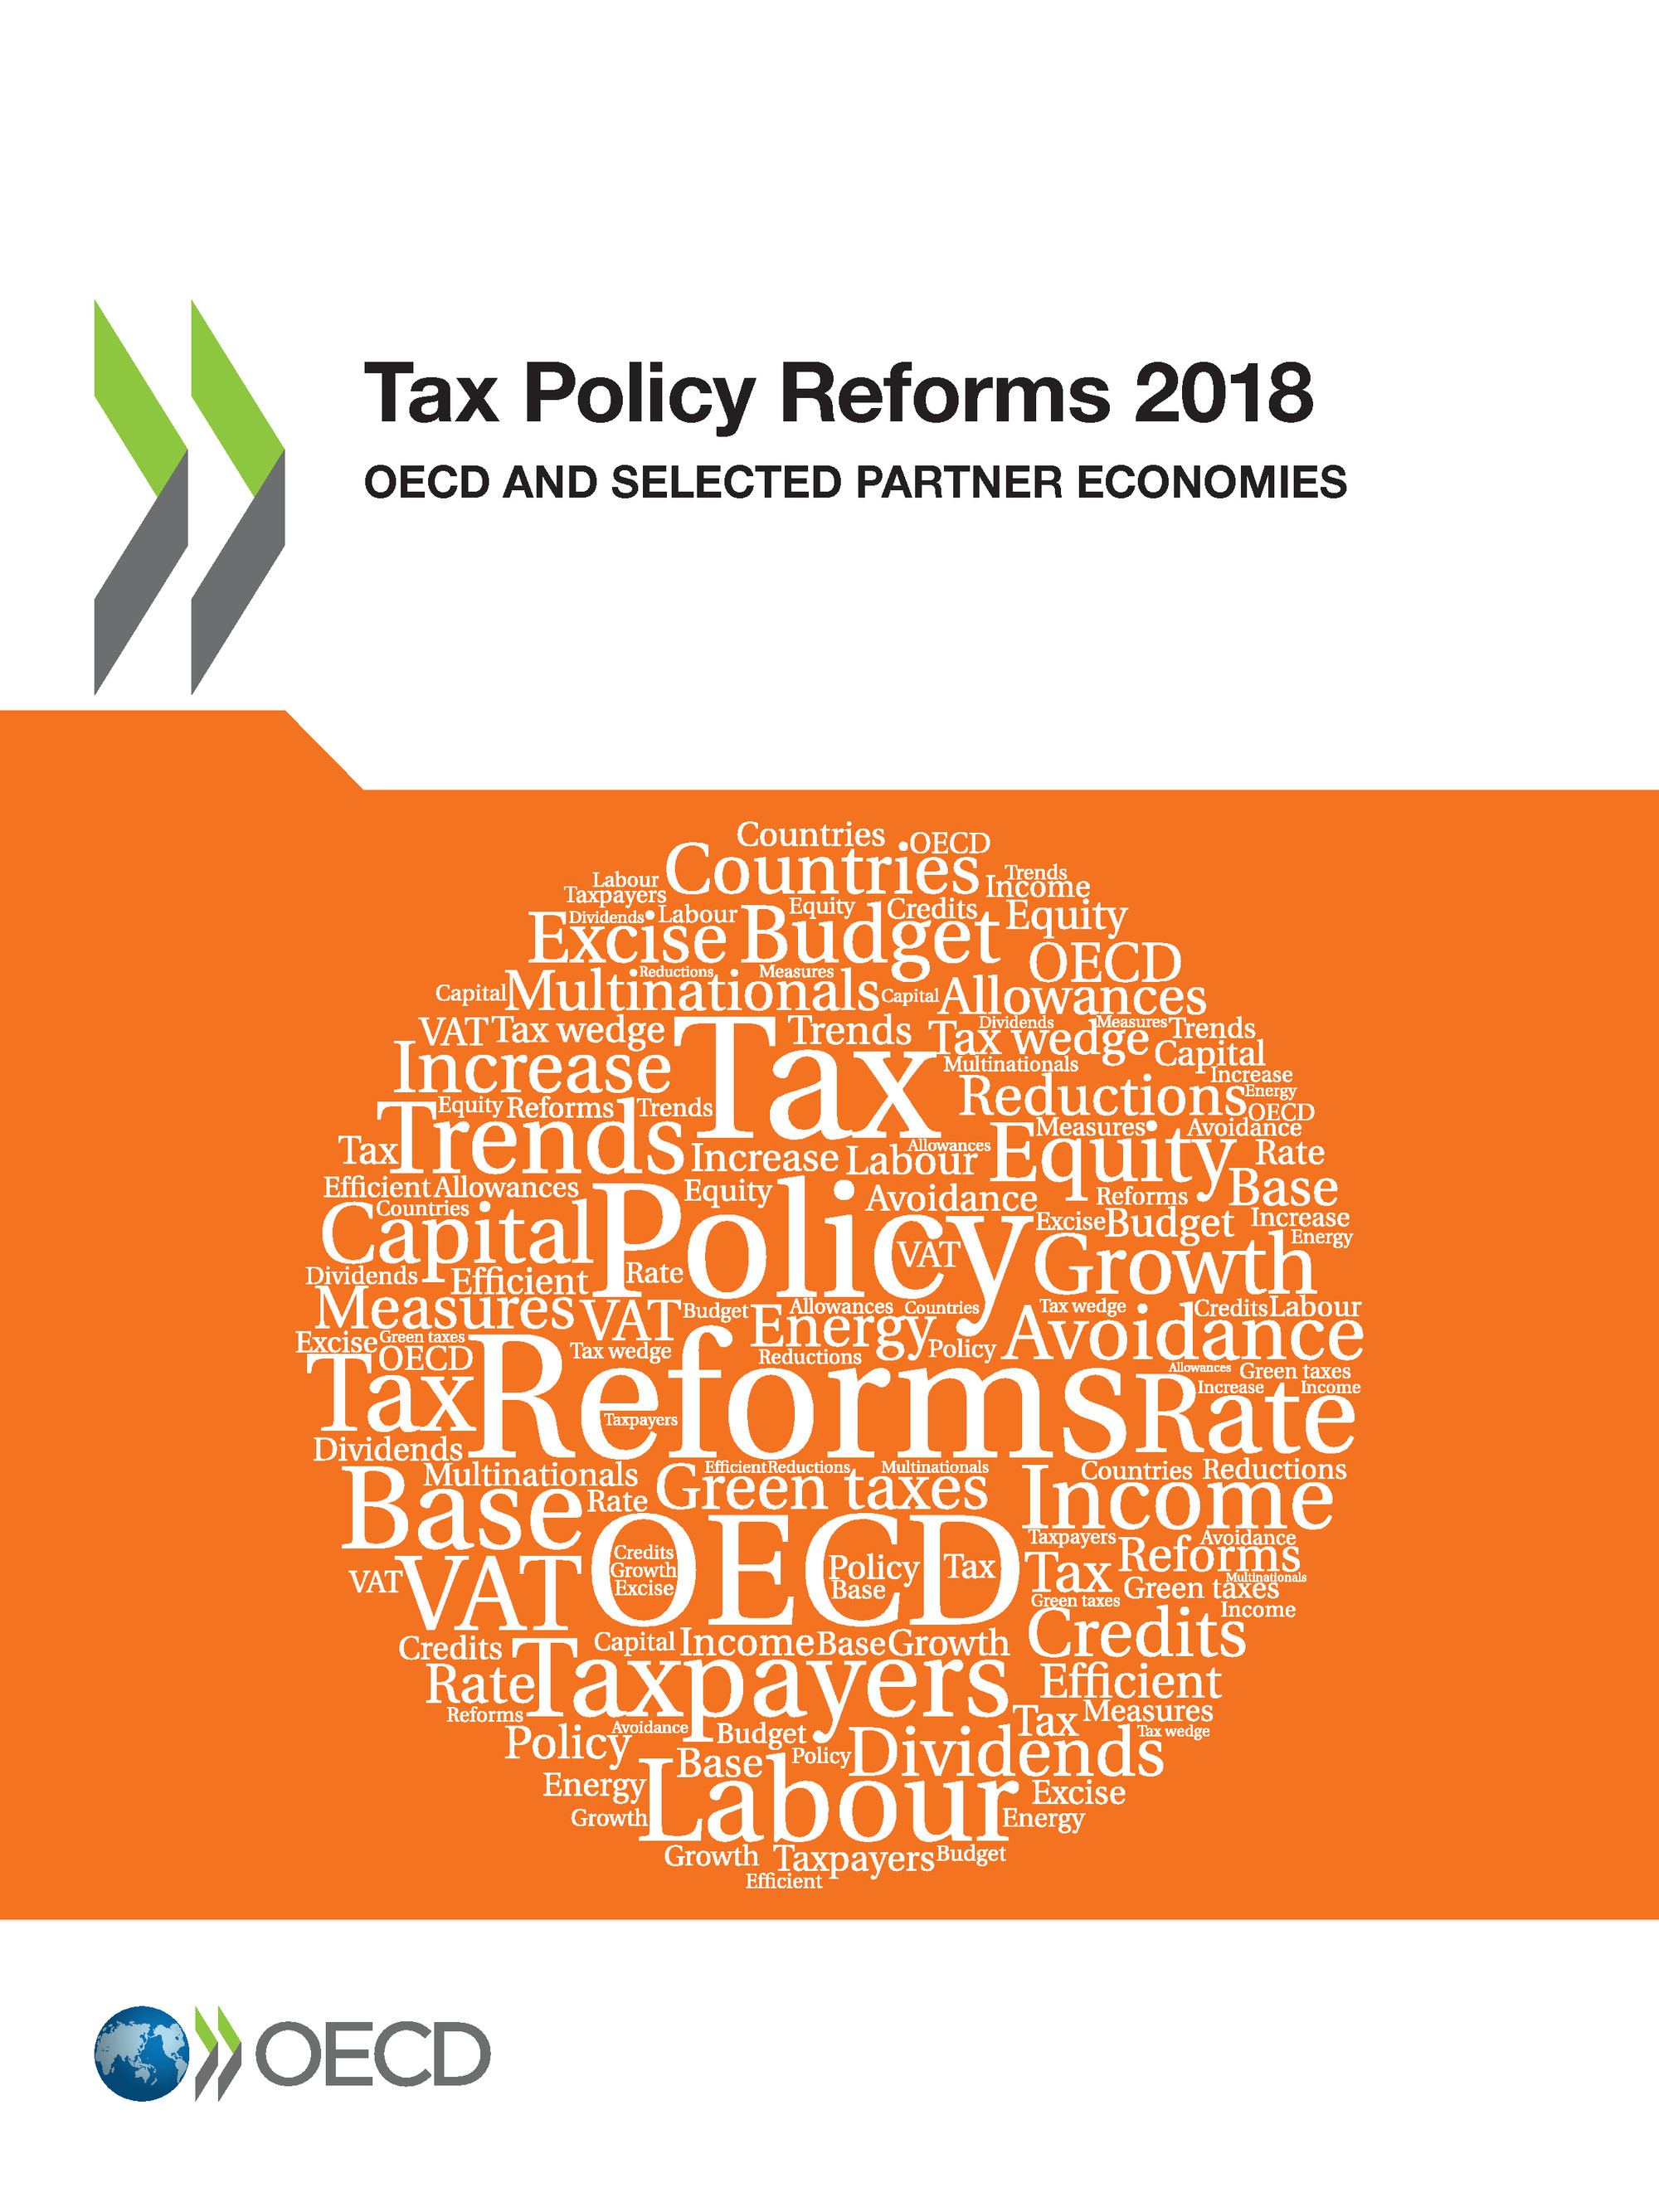 Tax Policy Reforms 2018 -  Collectif - OCDE / OECD